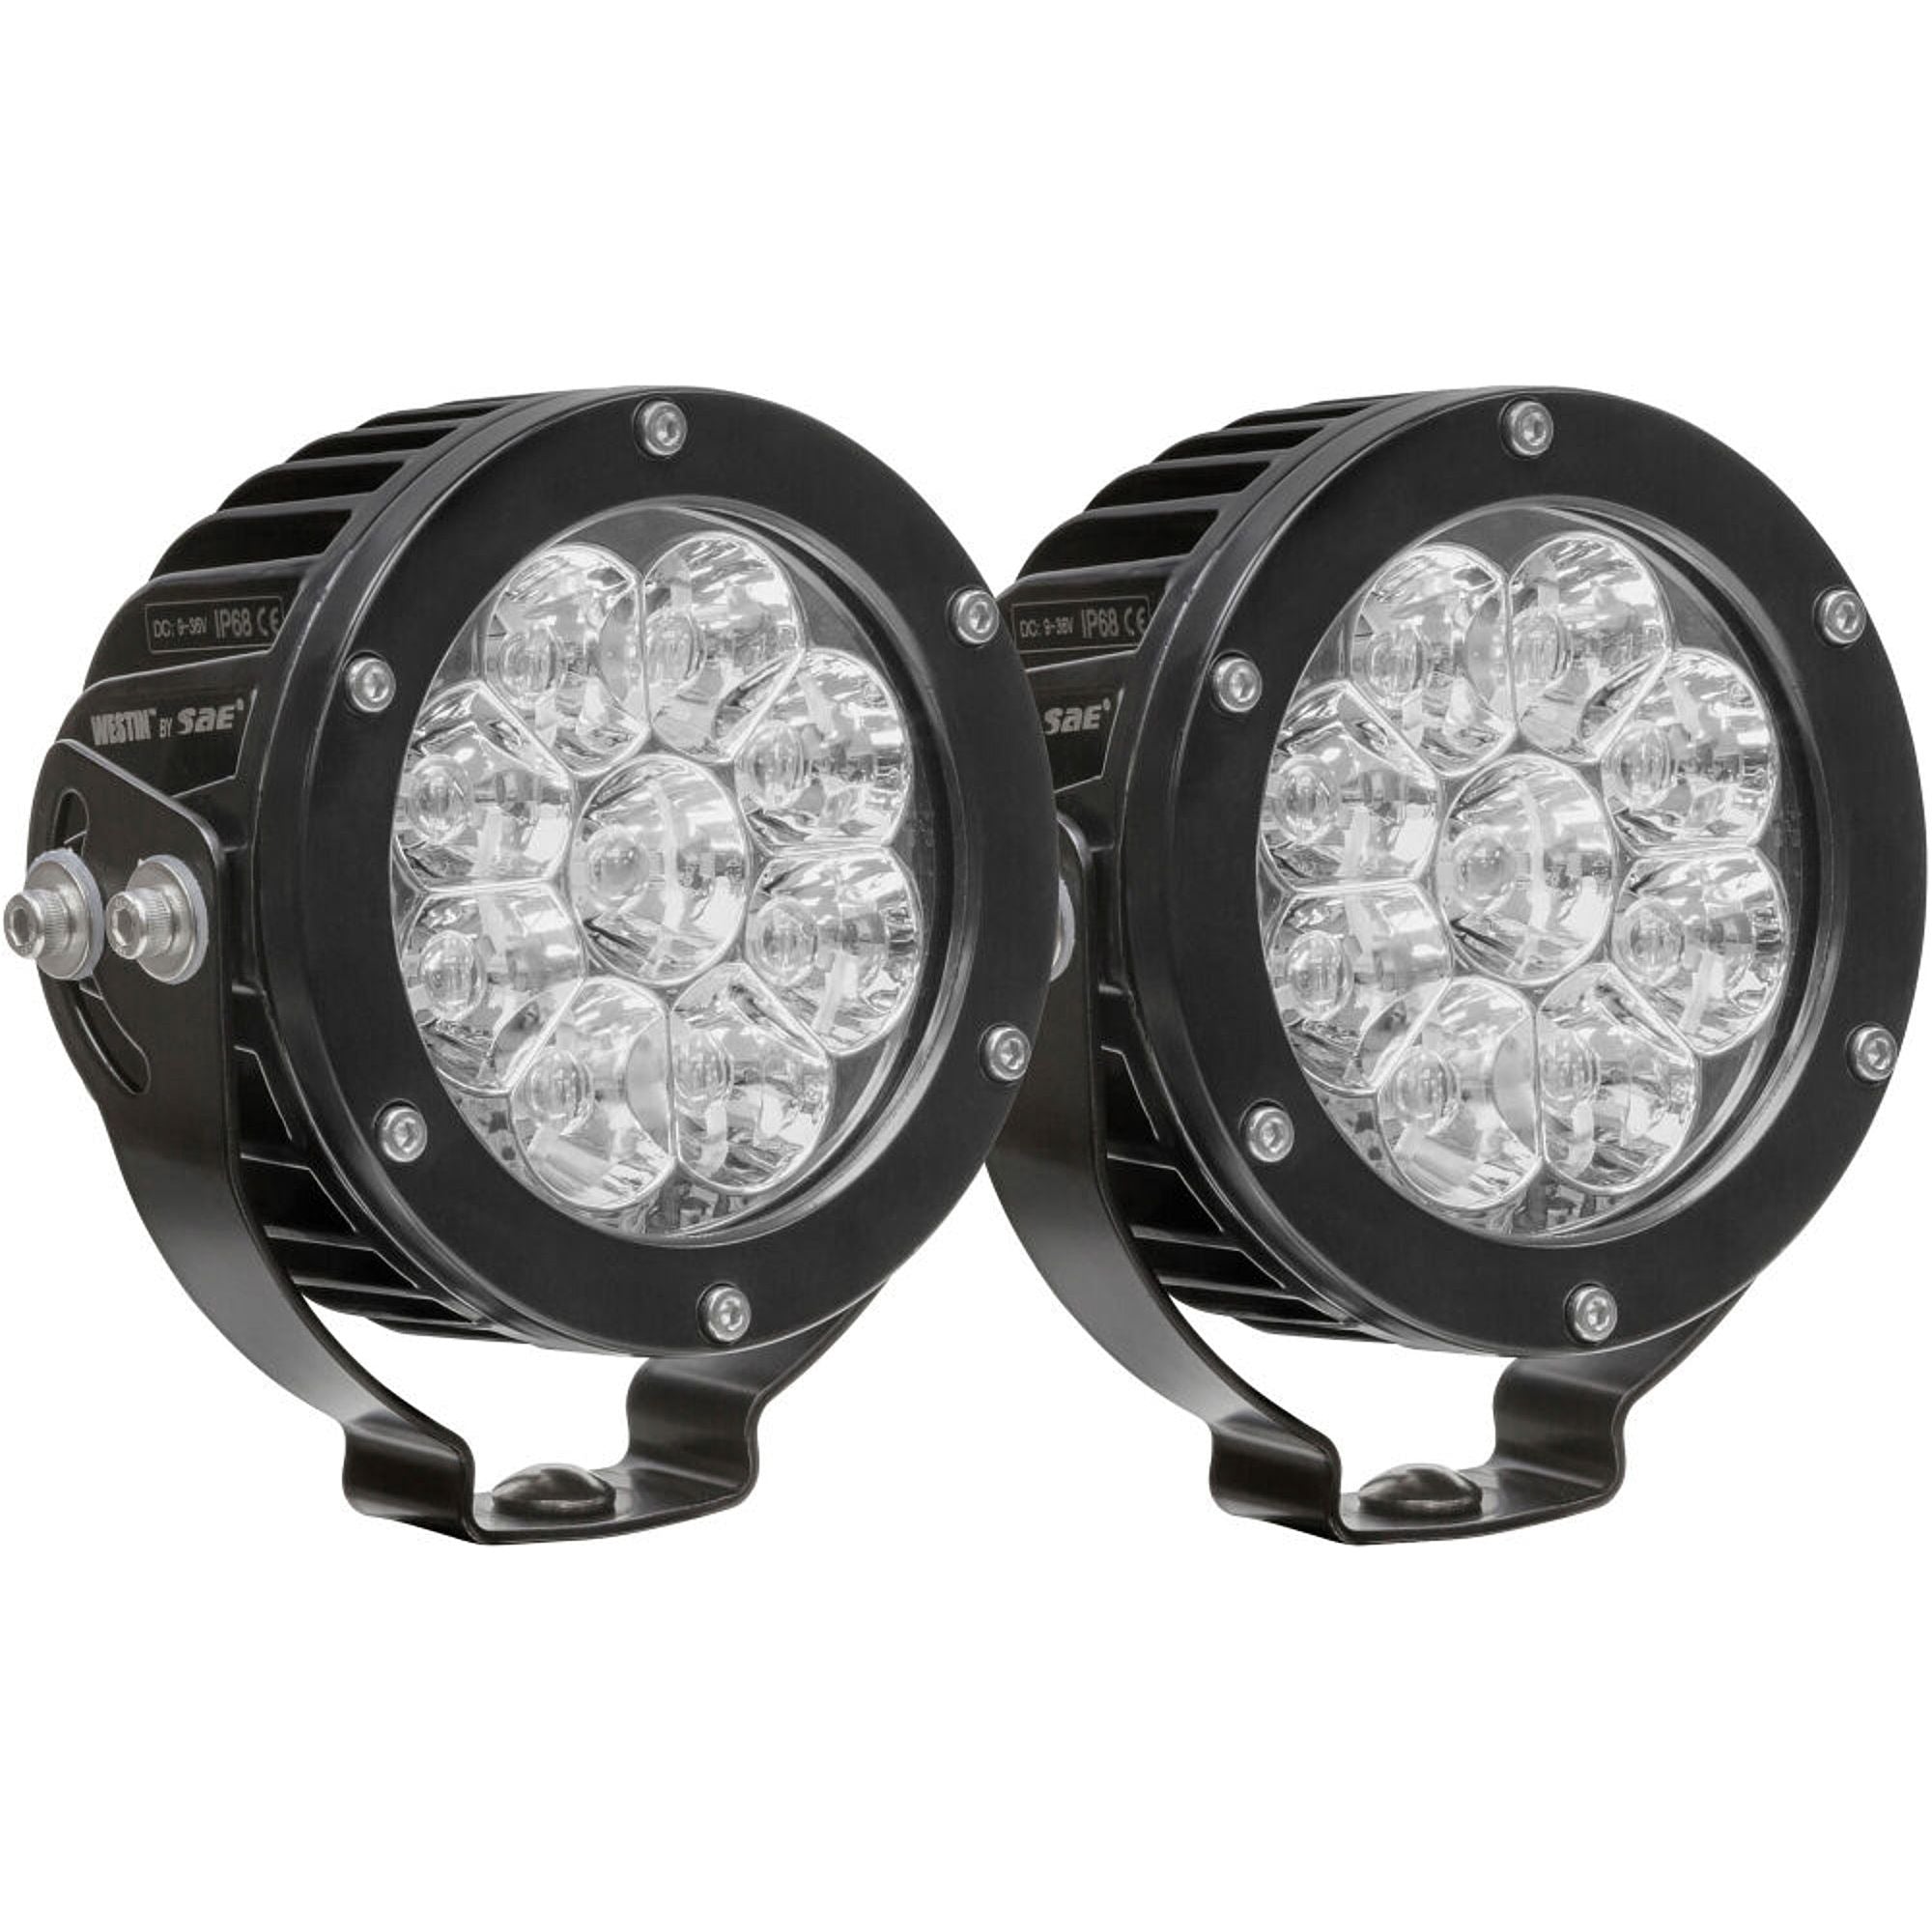 WESTIN 09-12007A-PR - Axis LED Auxiliary Light Round Spot Pattern Pair